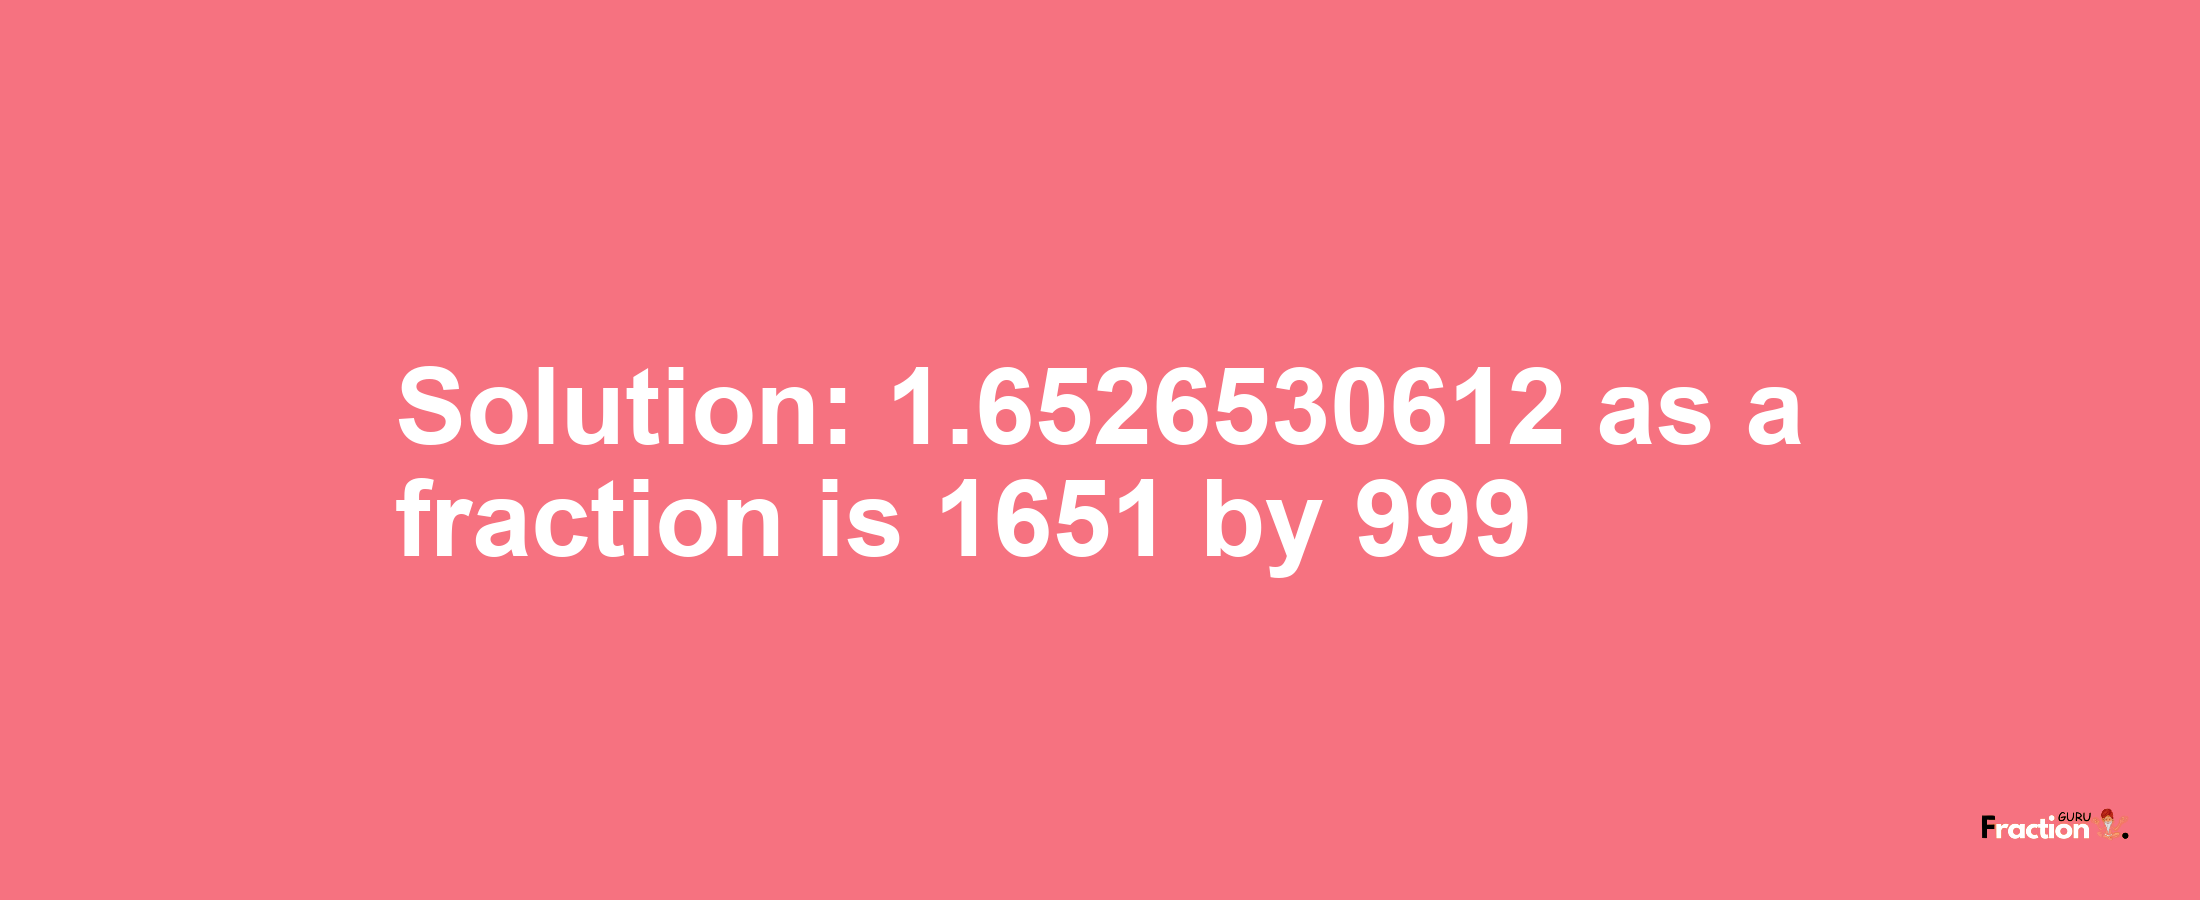 Solution:1.6526530612 as a fraction is 1651/999